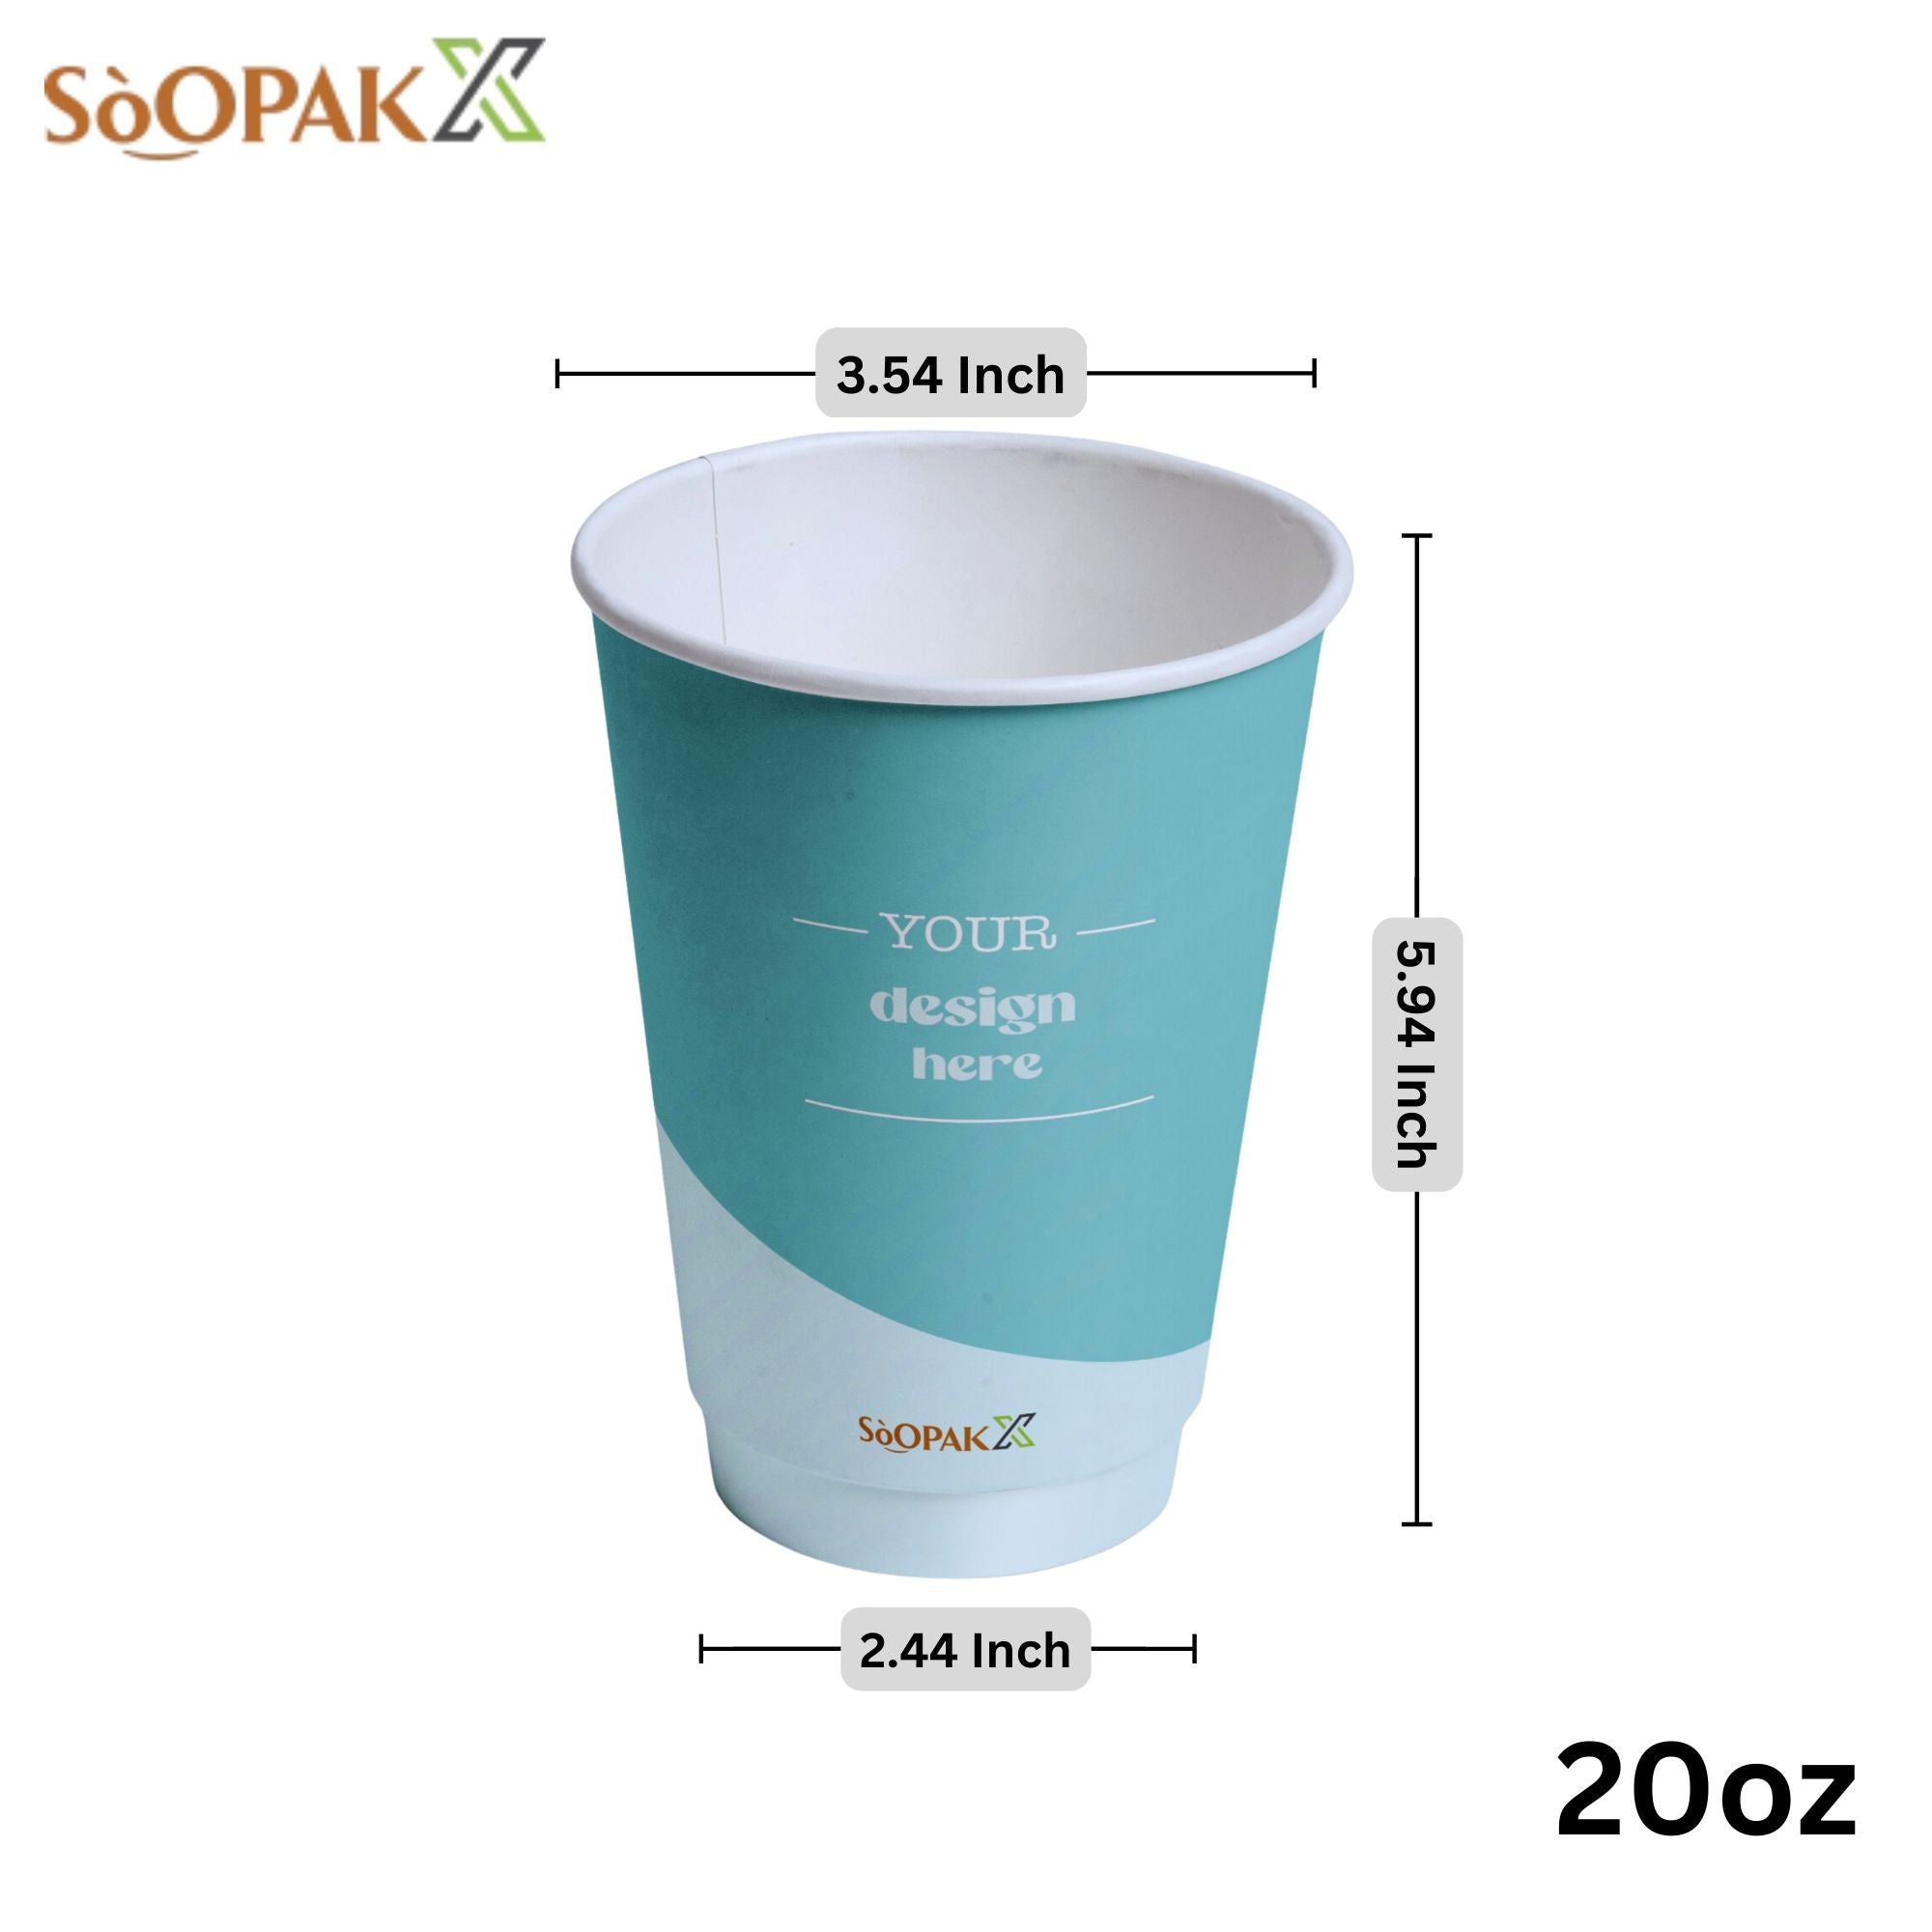 Custom Double-Walled Coffee Cups, avoid leaks, durable, warming, biodegradable, freshness, takeout, Packaging, easy visibility, food safe, avoid leaks, high-quality, dinnerware, Ecosmart, sustainable, coffee, tea, epitomize, biodegradable, renewable, hot chocolate, morning coffee, double-walled cups, freshness, takeout, Packaging, avoid spills, food safe, microwavable, elegance, dinnerware, strong, resilient, avoid leaks, restaurants, perfect choice, bulk pack, party cups, Leak Resistant